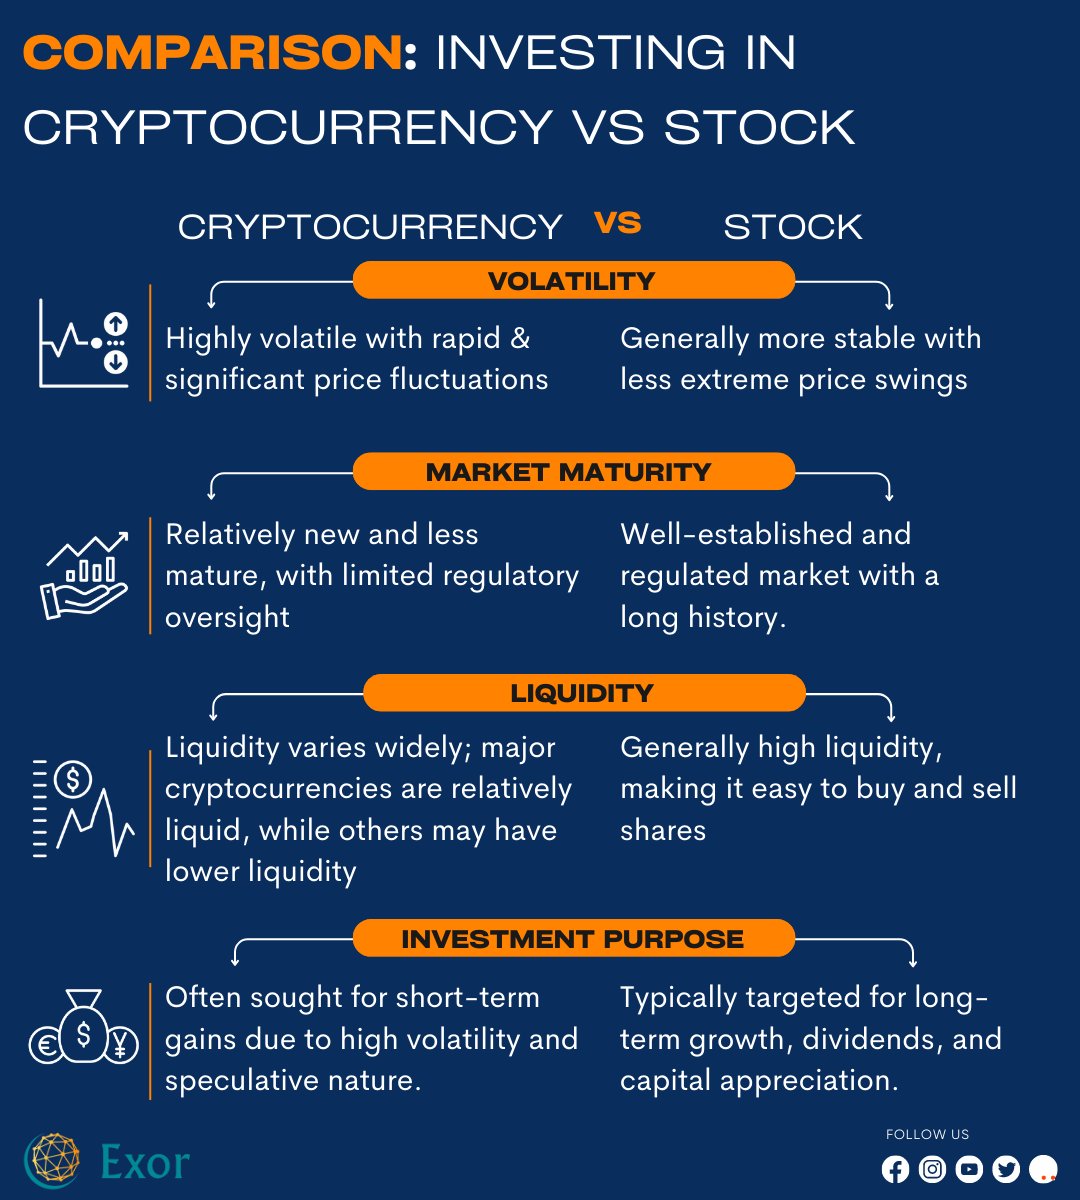 Compare the pros and cons of investing in cryptocurrency and stocks. Assess risk, potential returns, and market dynamics to make informed investment decisions. Choose your path to financial growth with Exor Company.

#CryptocurrencyVsStocks #InvestmentComparison #ExorCompany